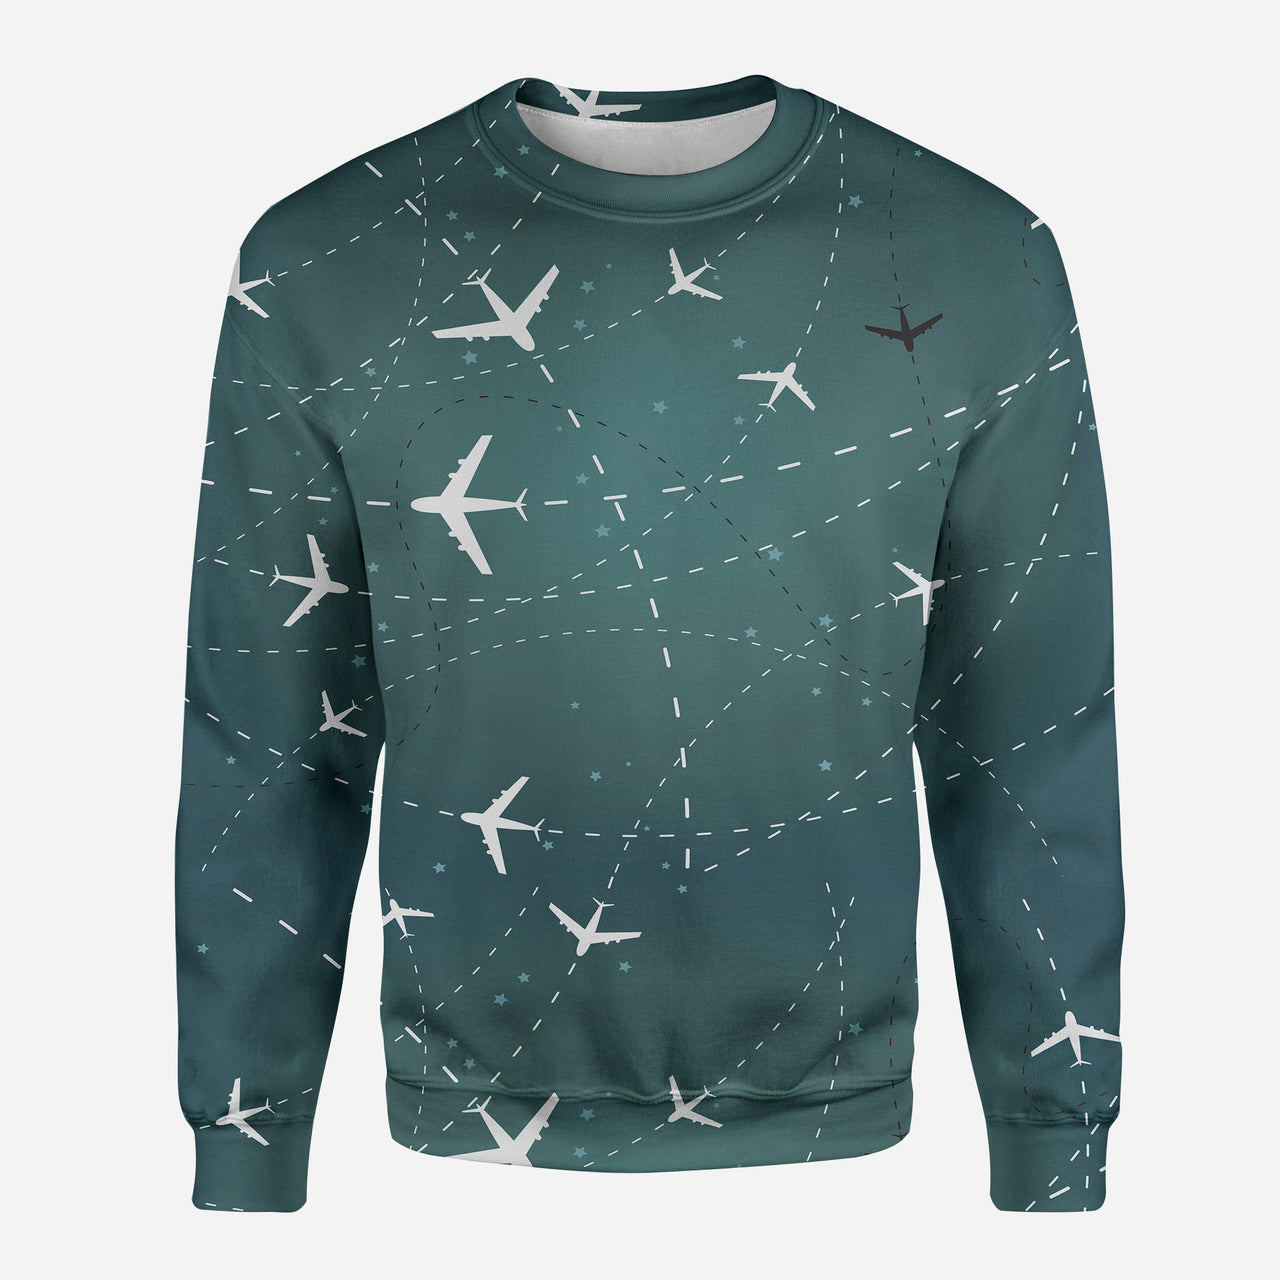 Travelling with Aircraft (Green) Designed 3D Sweatshirts